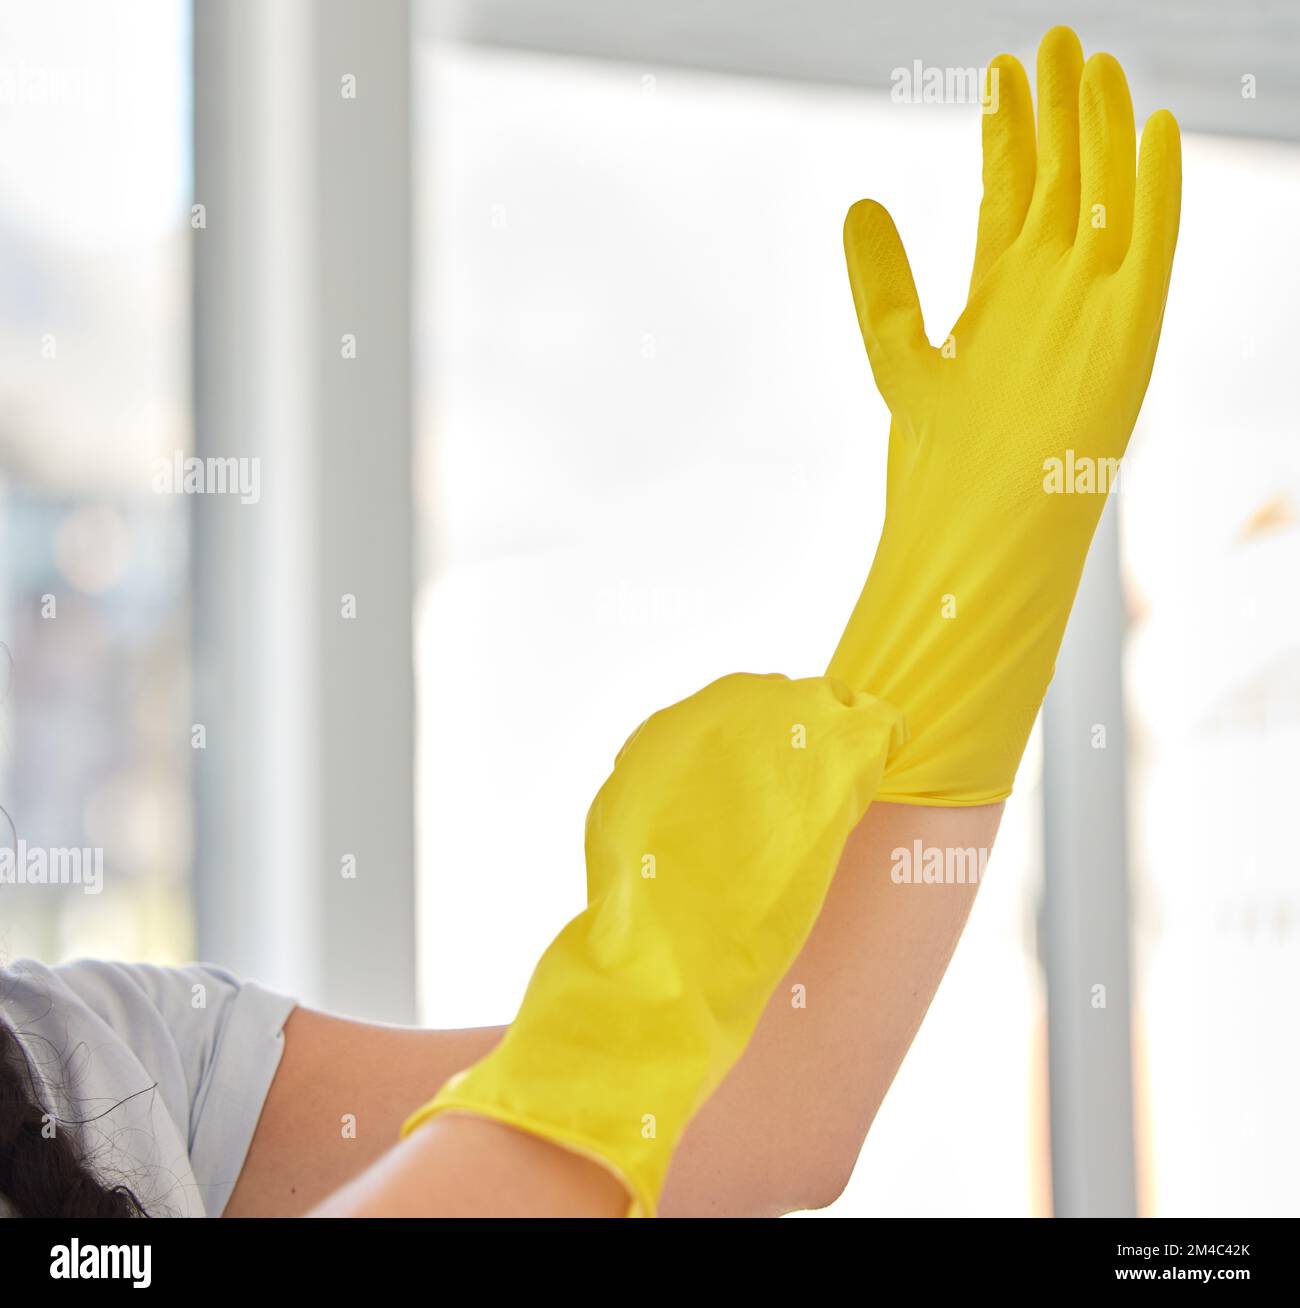 Hands, woman and gloves for cleaning home, hygiene and wellness. Cleaning service, spring cleaning and female ready to start work, sanitize and Stock Photo